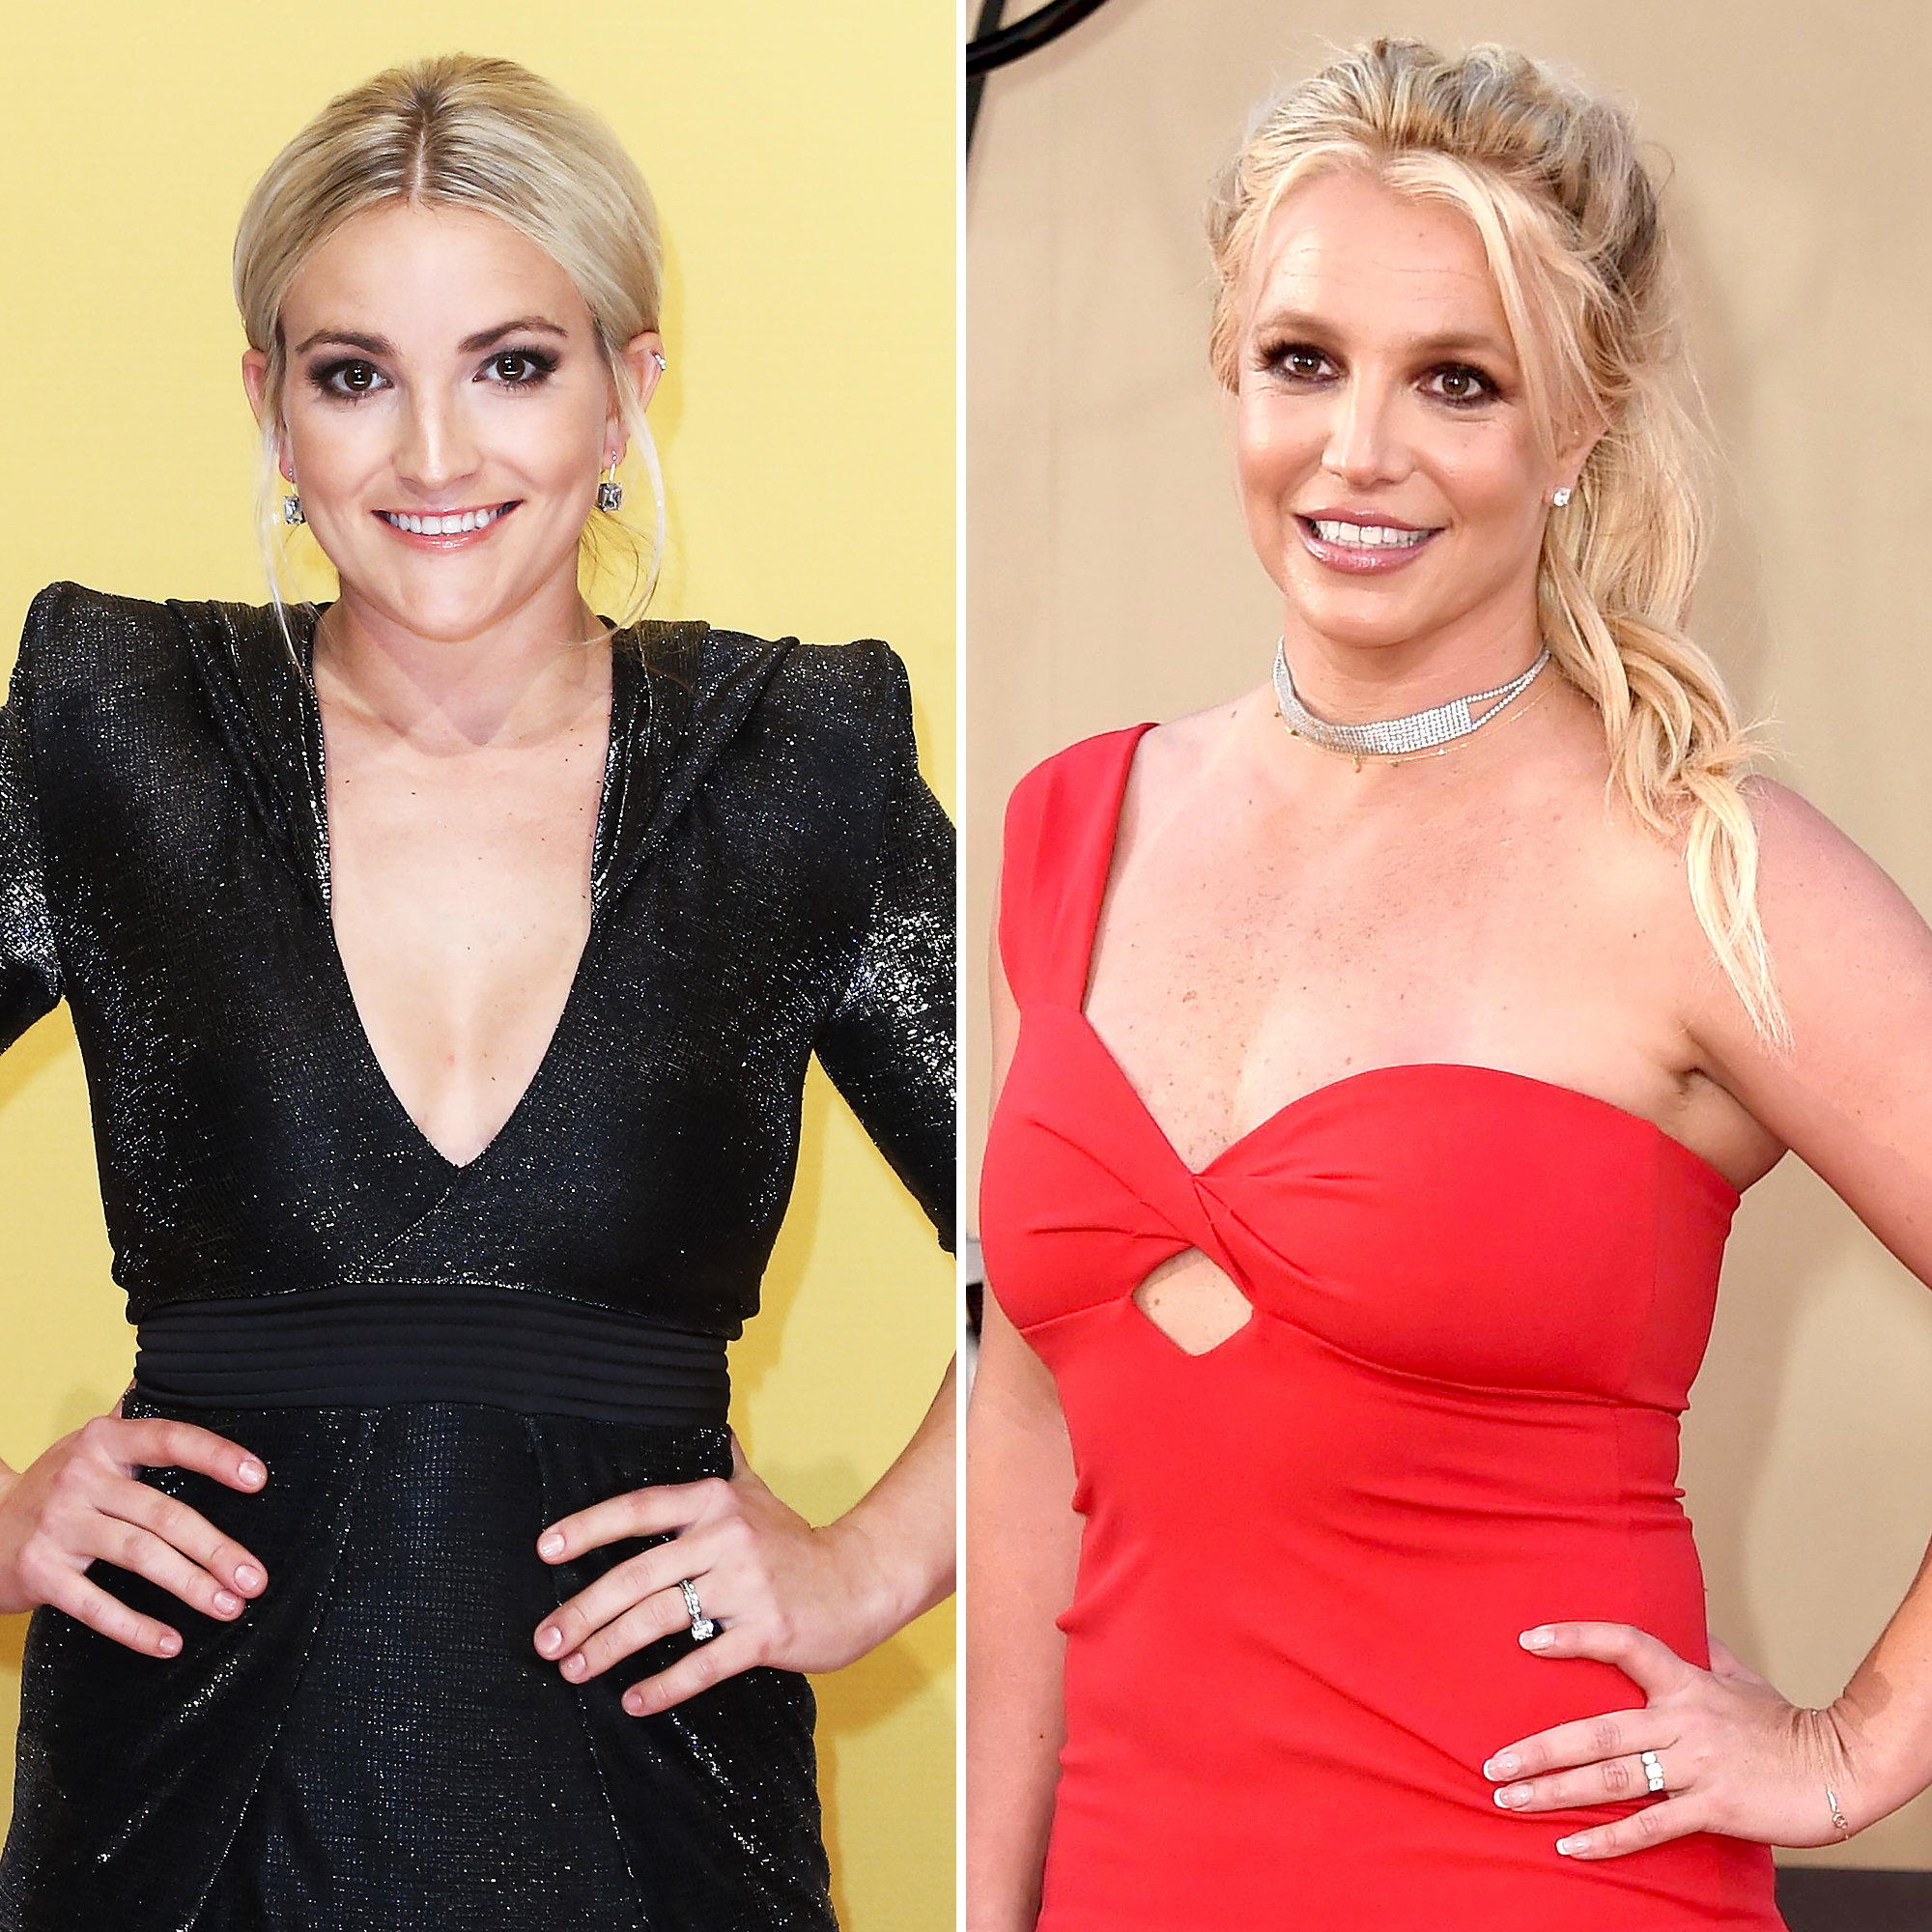 Does Jamie Lynn Spears Porn - Jamie Lynn Spears Says Britney Spears Is 'Trying' to 'Stay Positive'